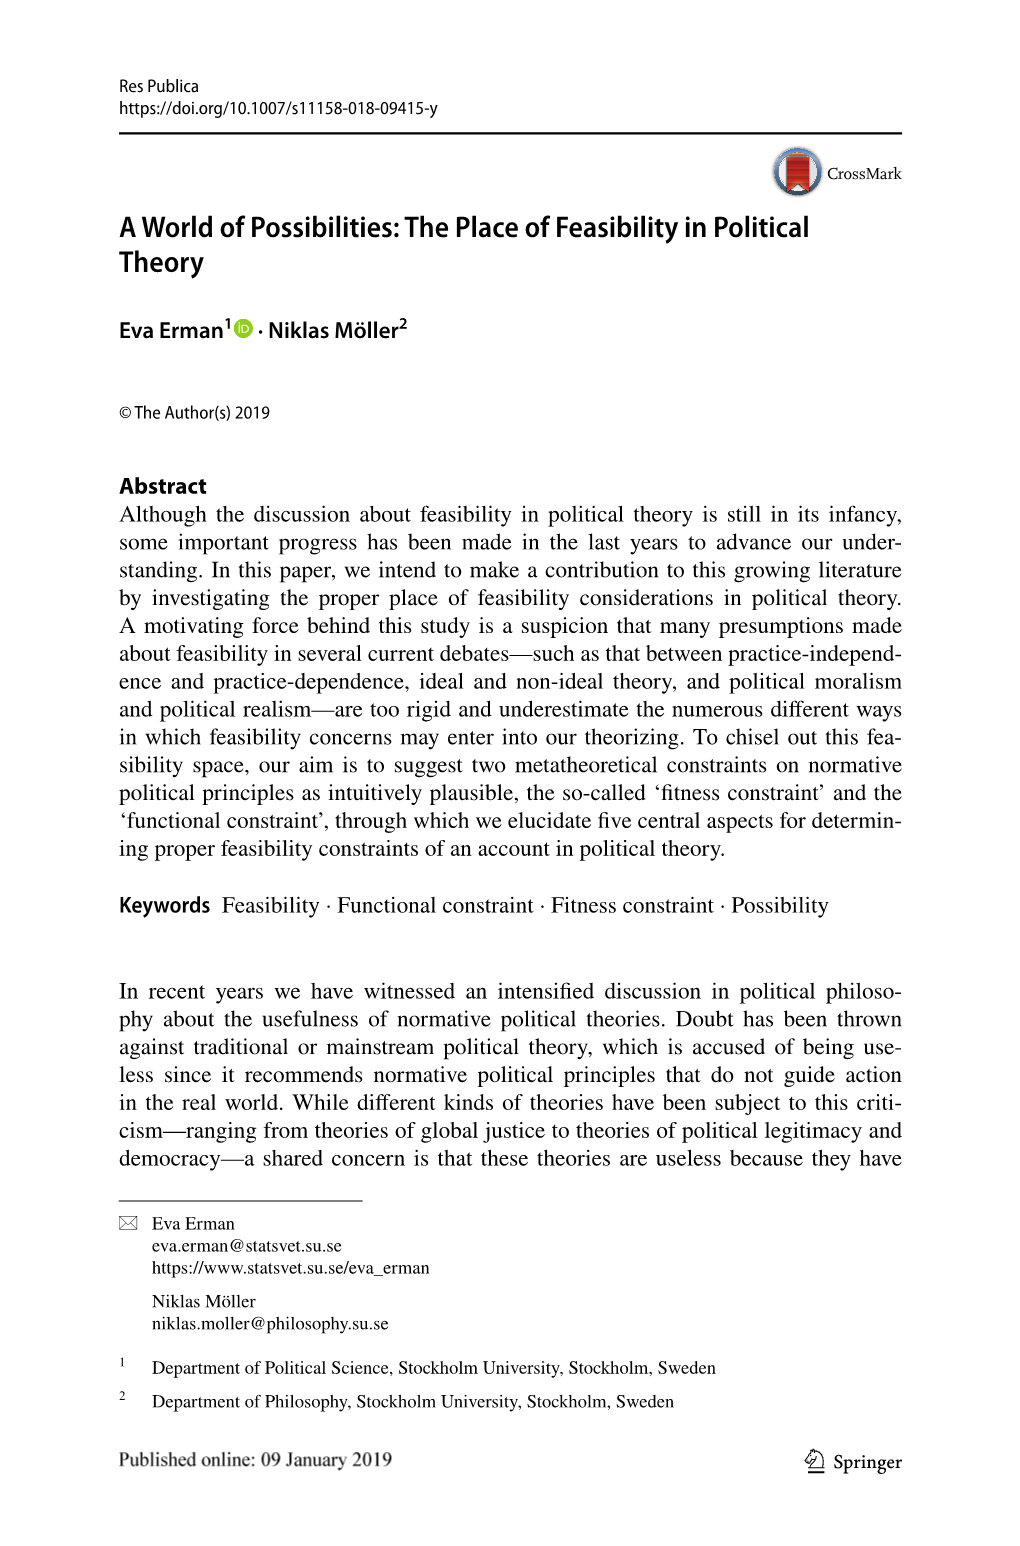 A World of Possibilities: the Place of Feasibility in Political Theory